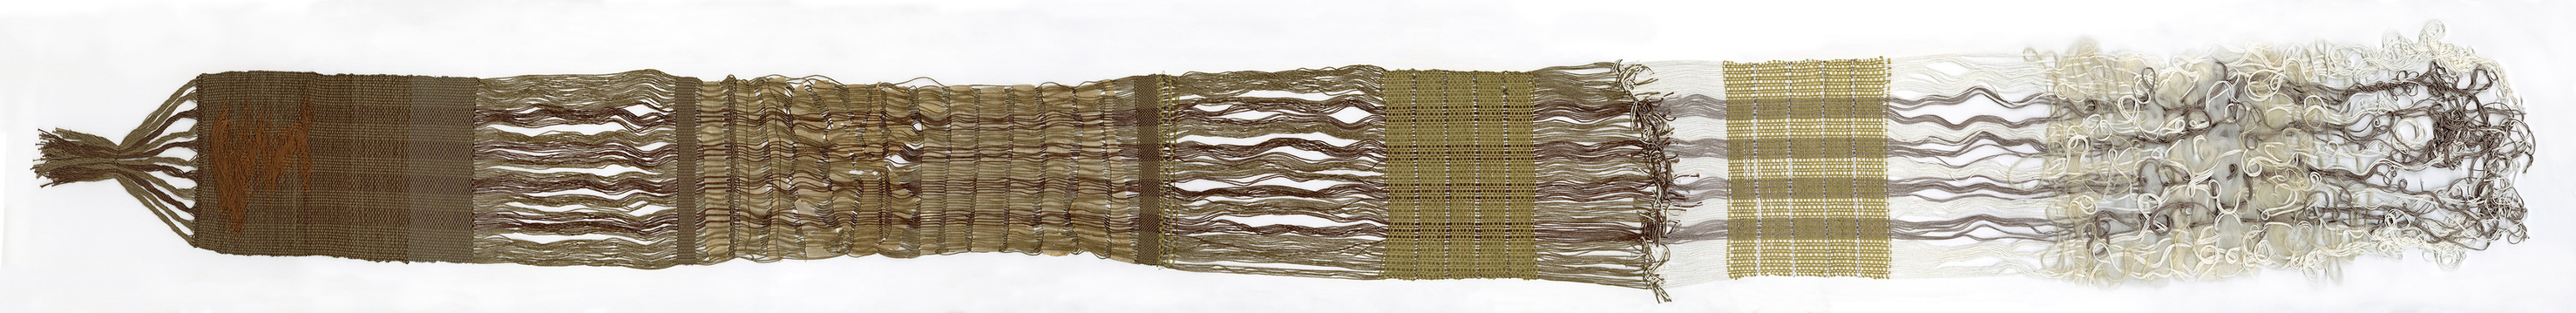  Weavings & Woven Structures Cotton, abaca paper, wool, and monofilament